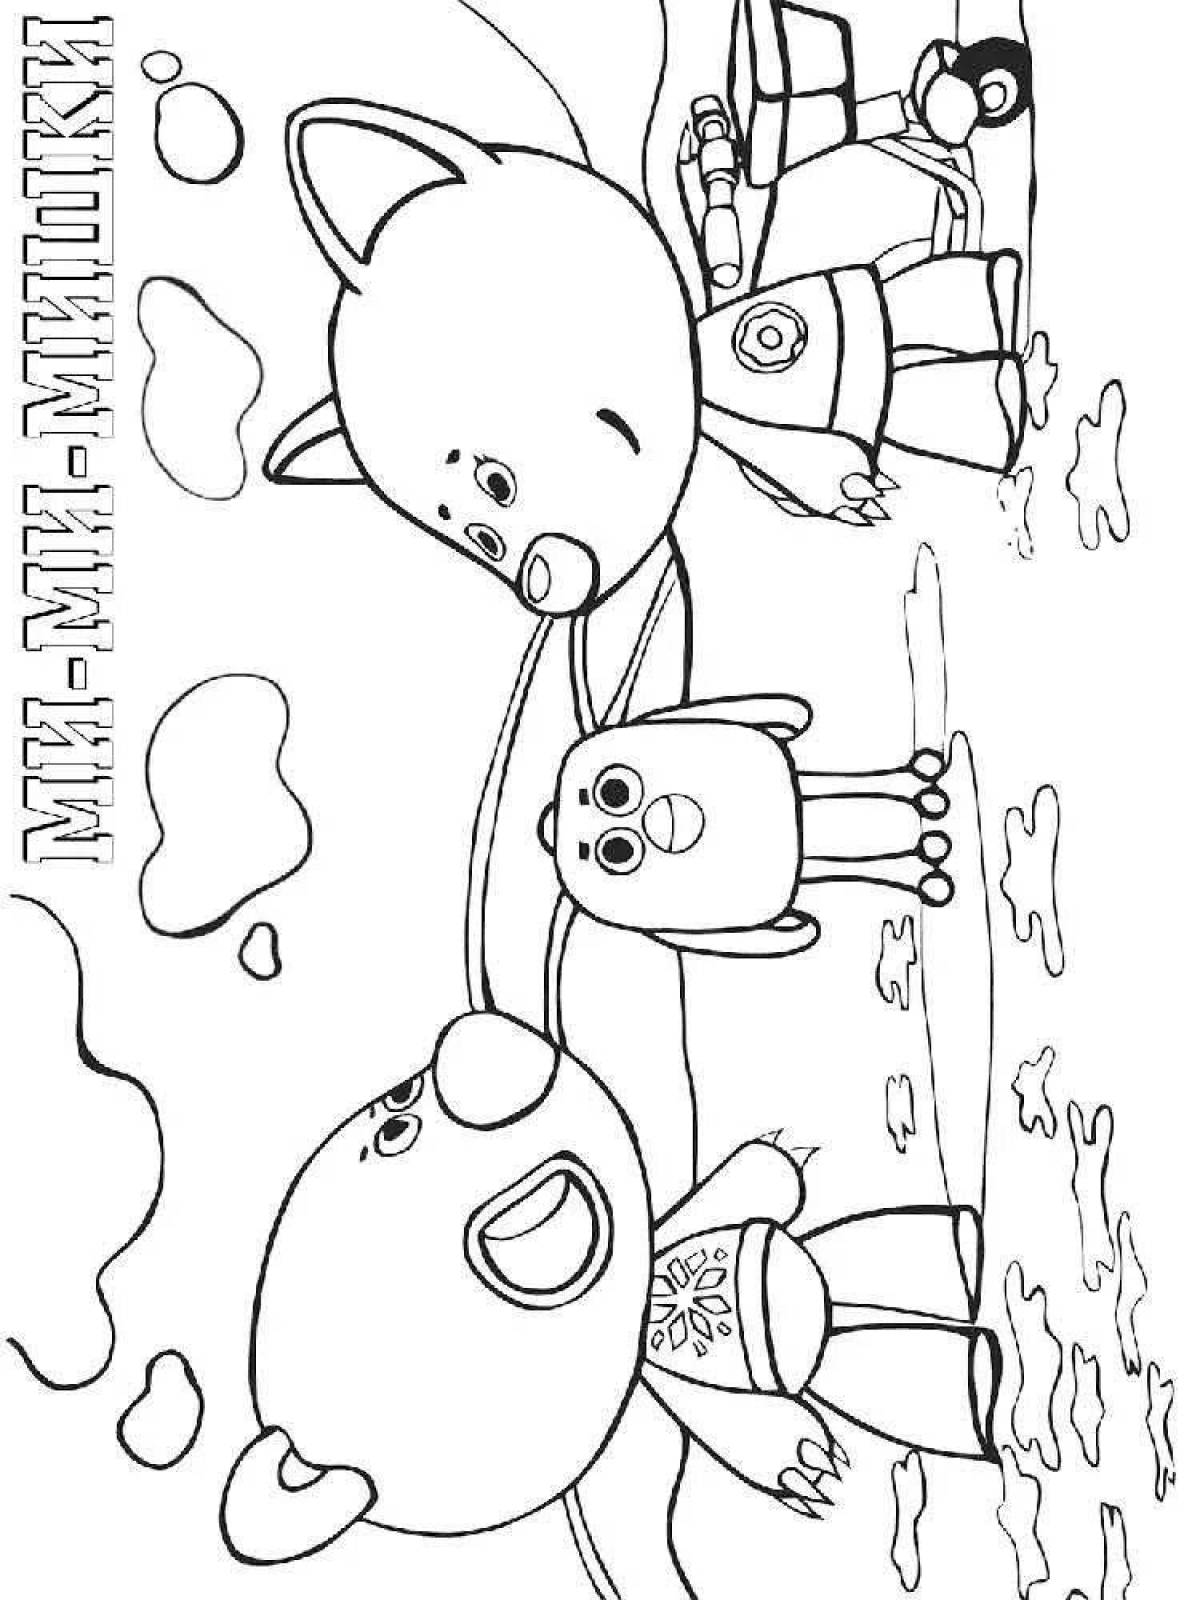 Exciting coloring pages for android